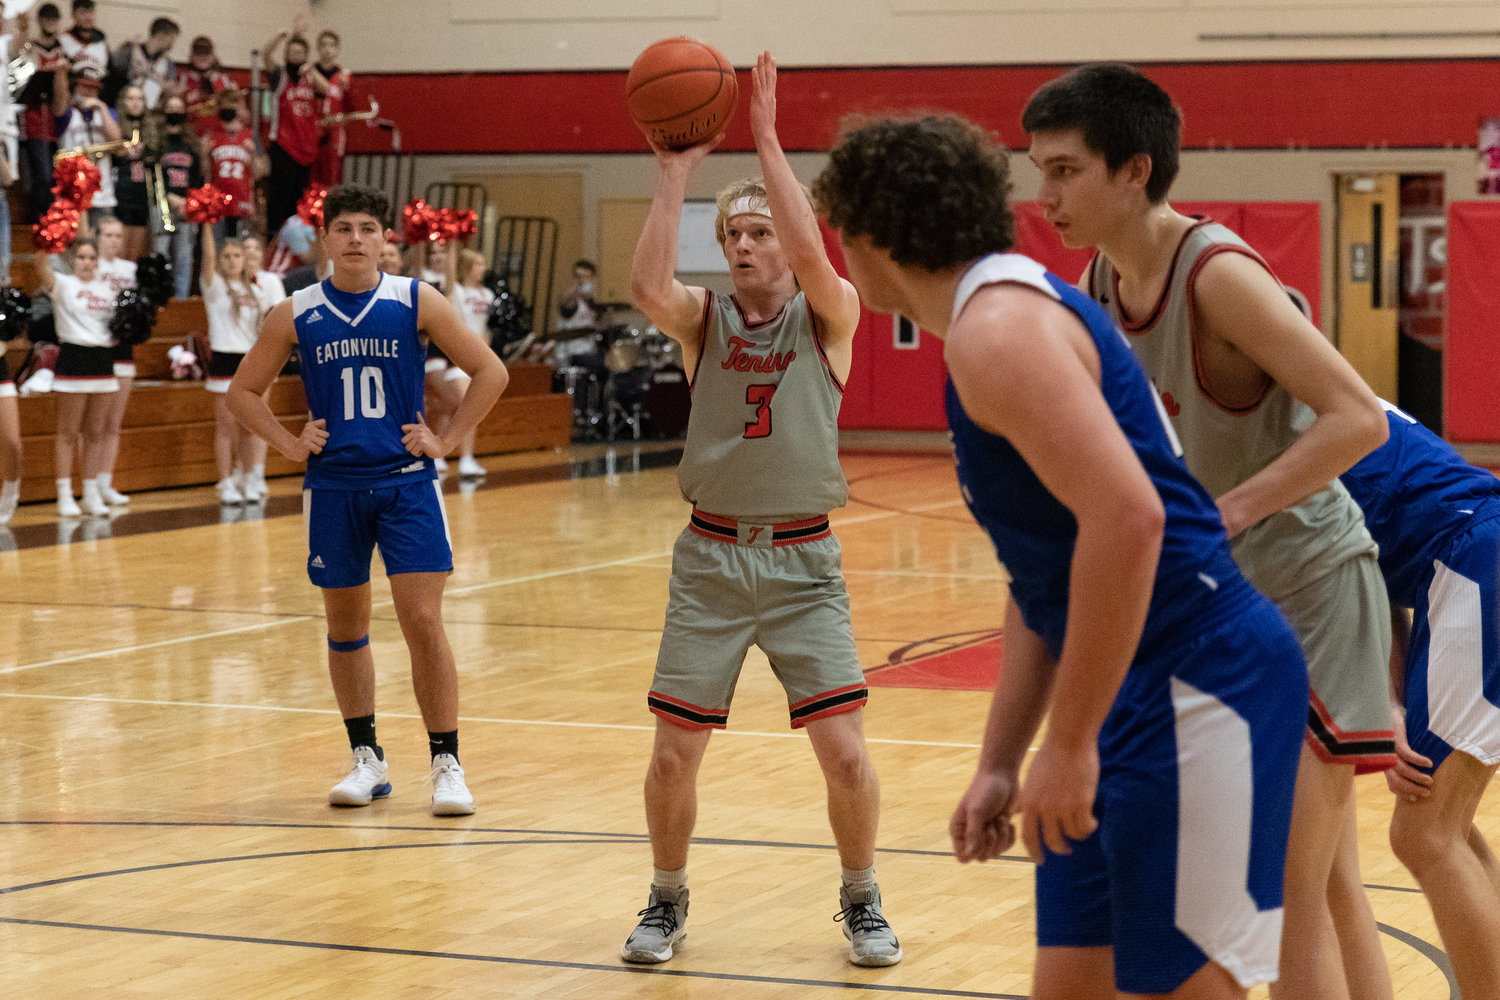 Tenino guard Toby Suess takes a free throw against Eatonville Jan. 20.